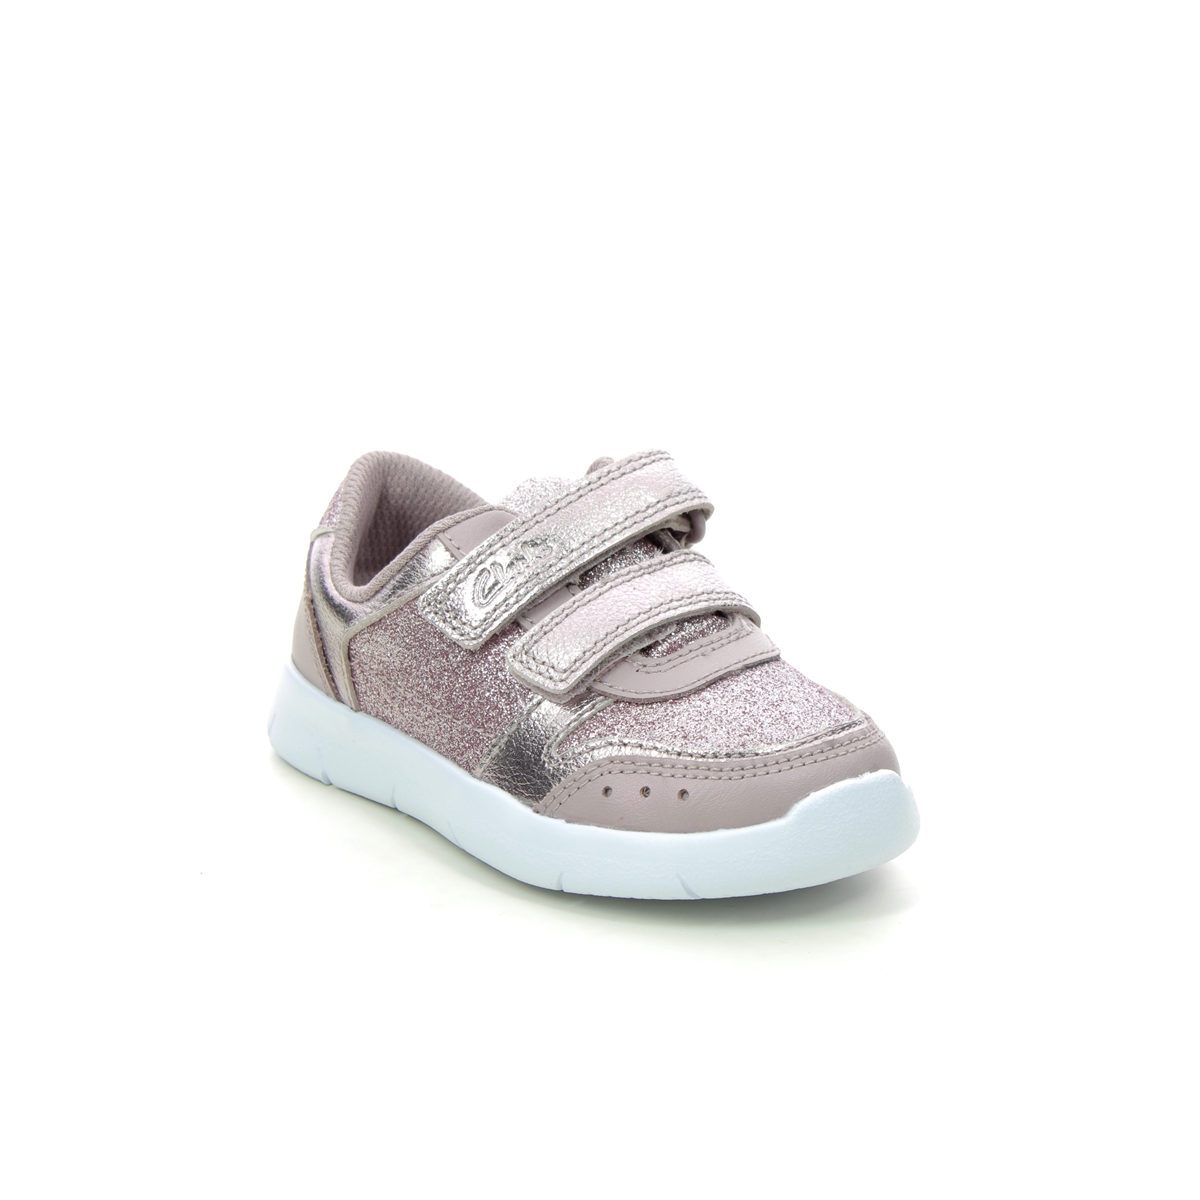 Clarks Ath Sonar T Pink Kids Toddler Girls Trainers 683727G In Size 4.5 In Plain Pink G Width Fitting For kids